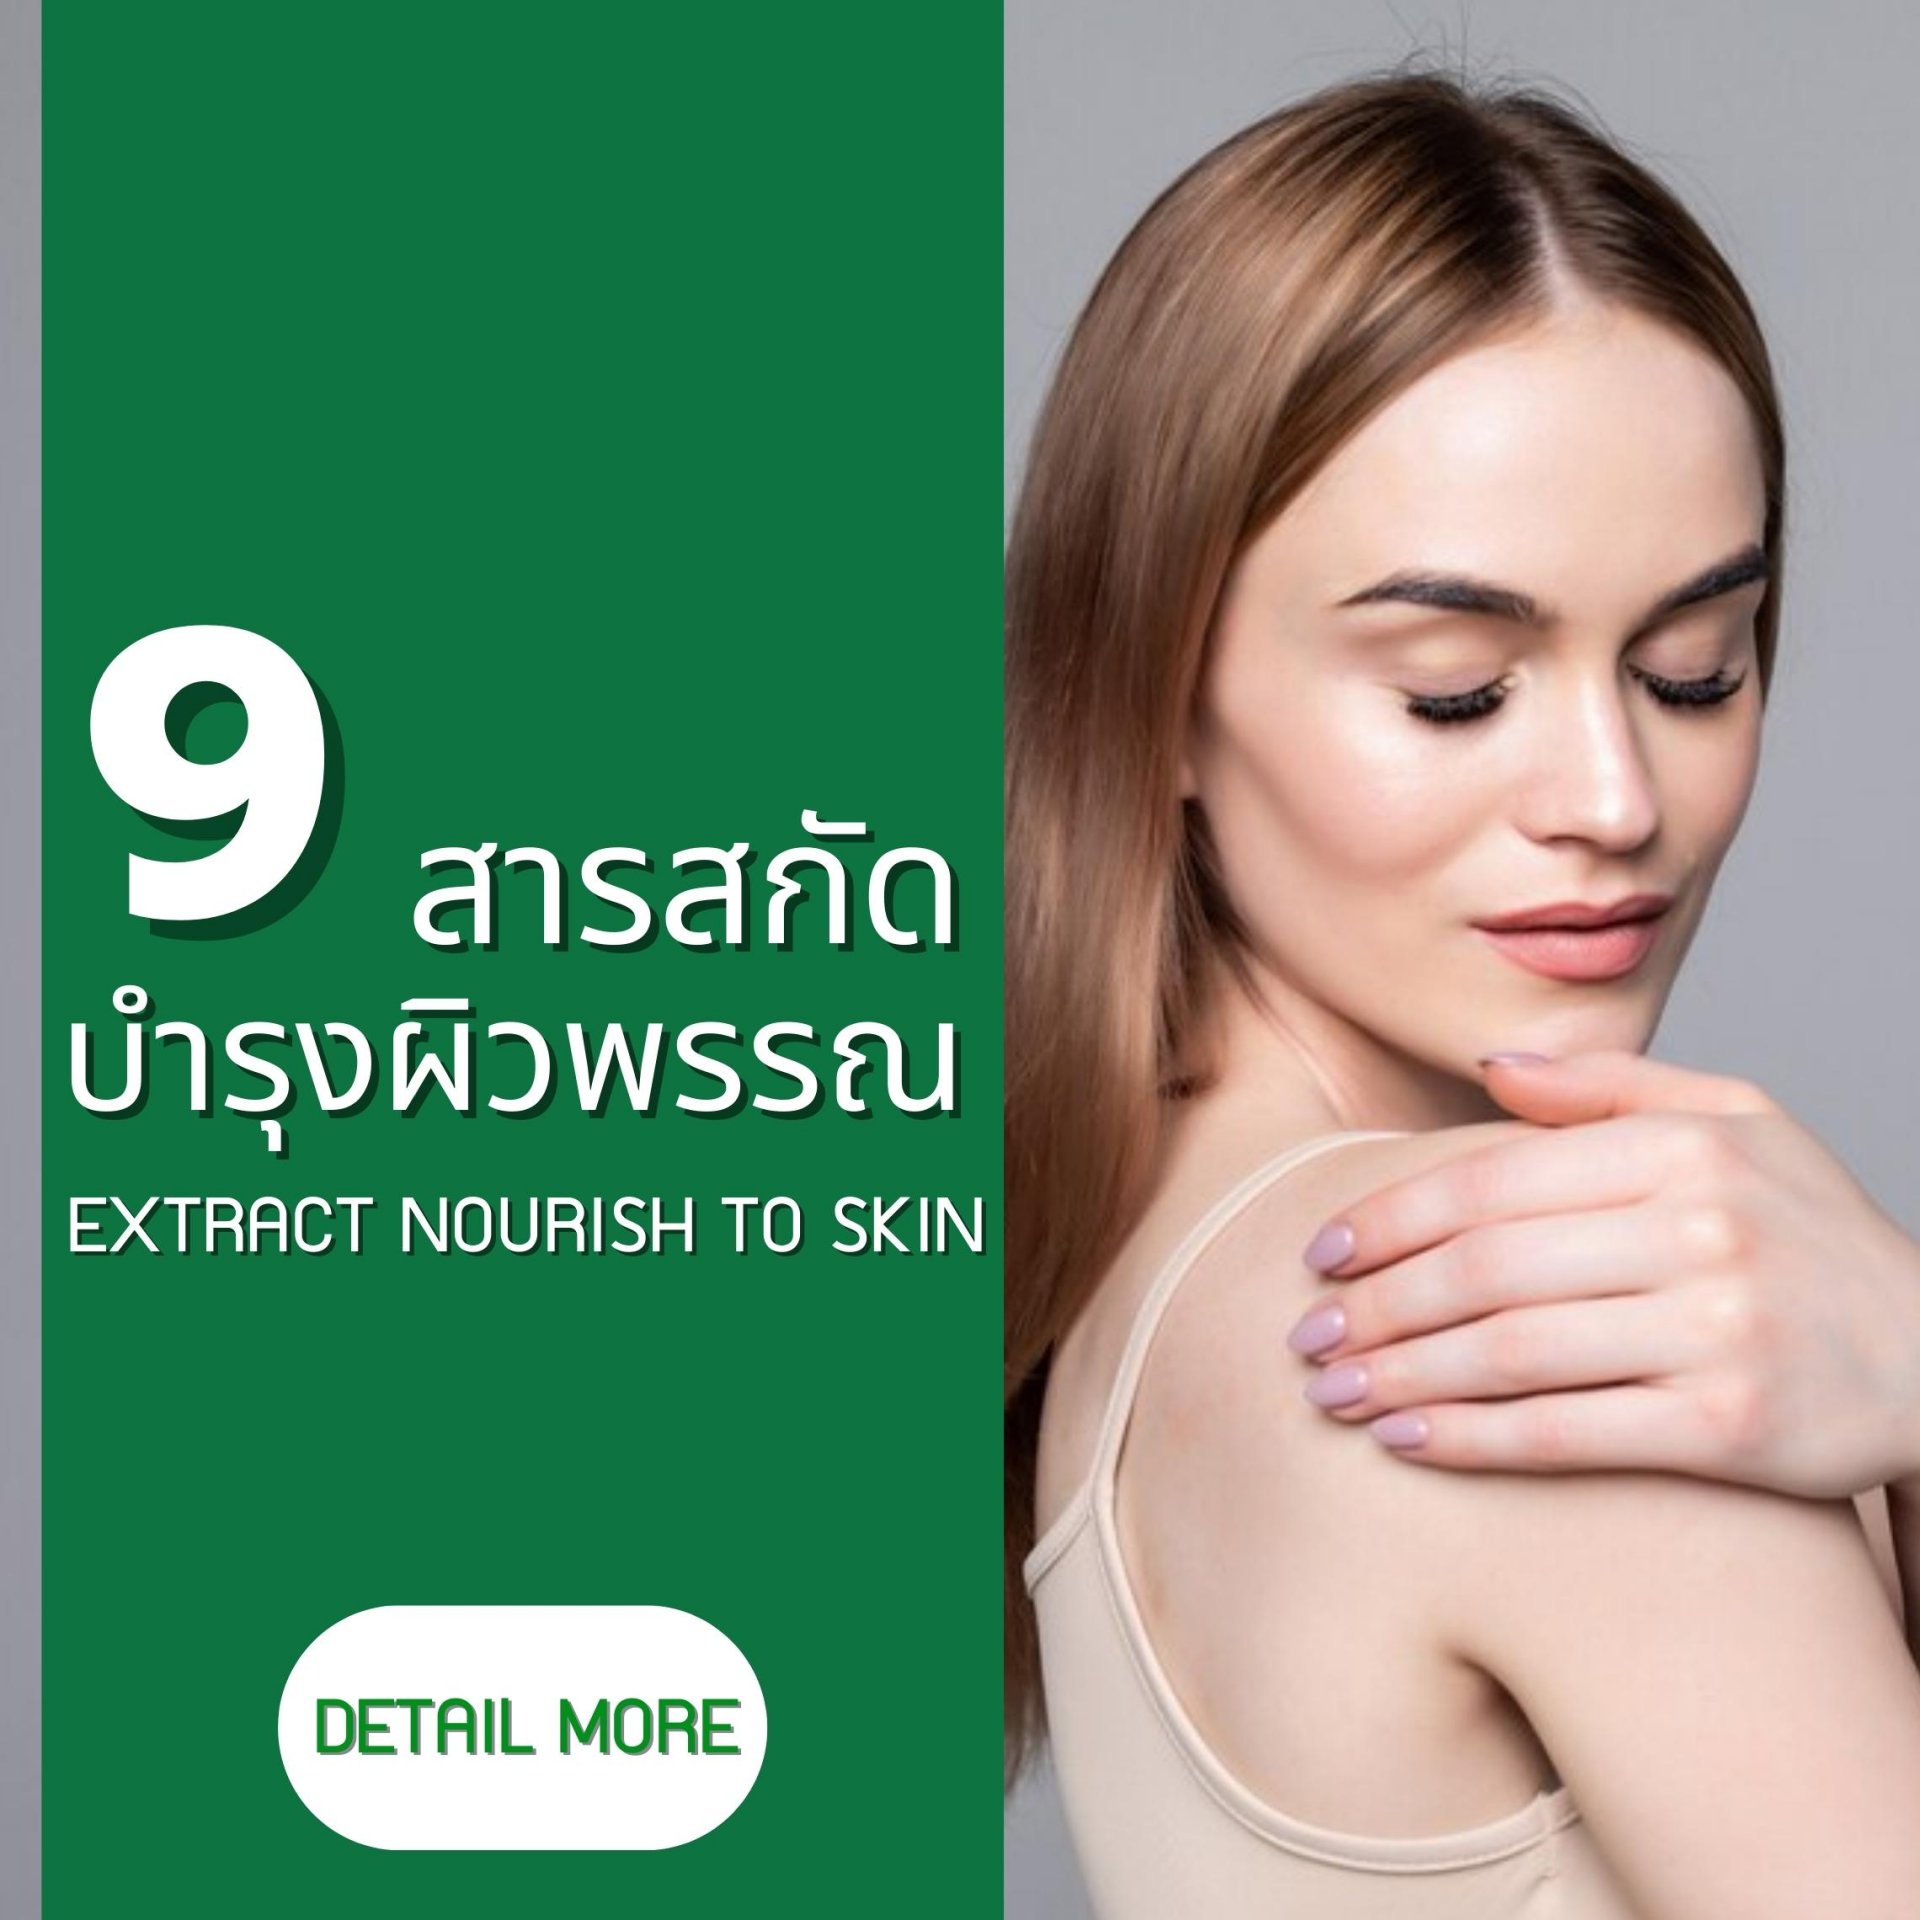 6 Extracts that nourish the skin